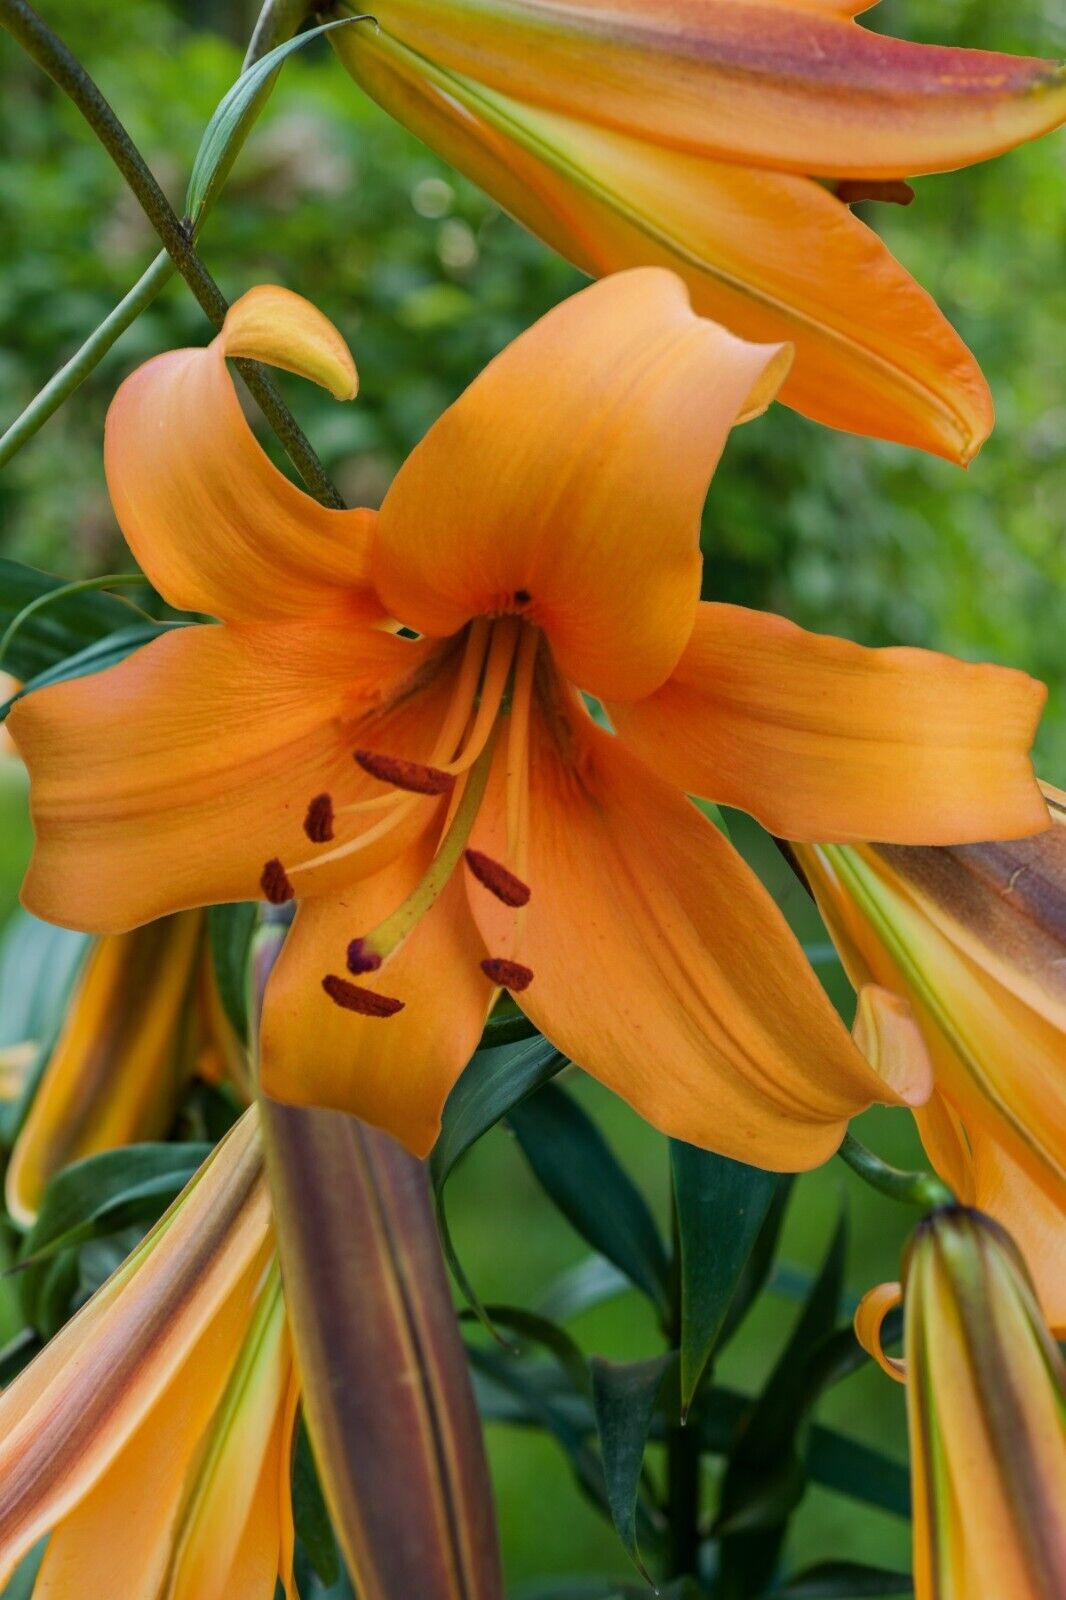 ORANGE SPACE ~TREE LILY~ FLOWER BULBS HARDY 4-8 FT. TALL GIANT FRAGRANT BLOOMS!